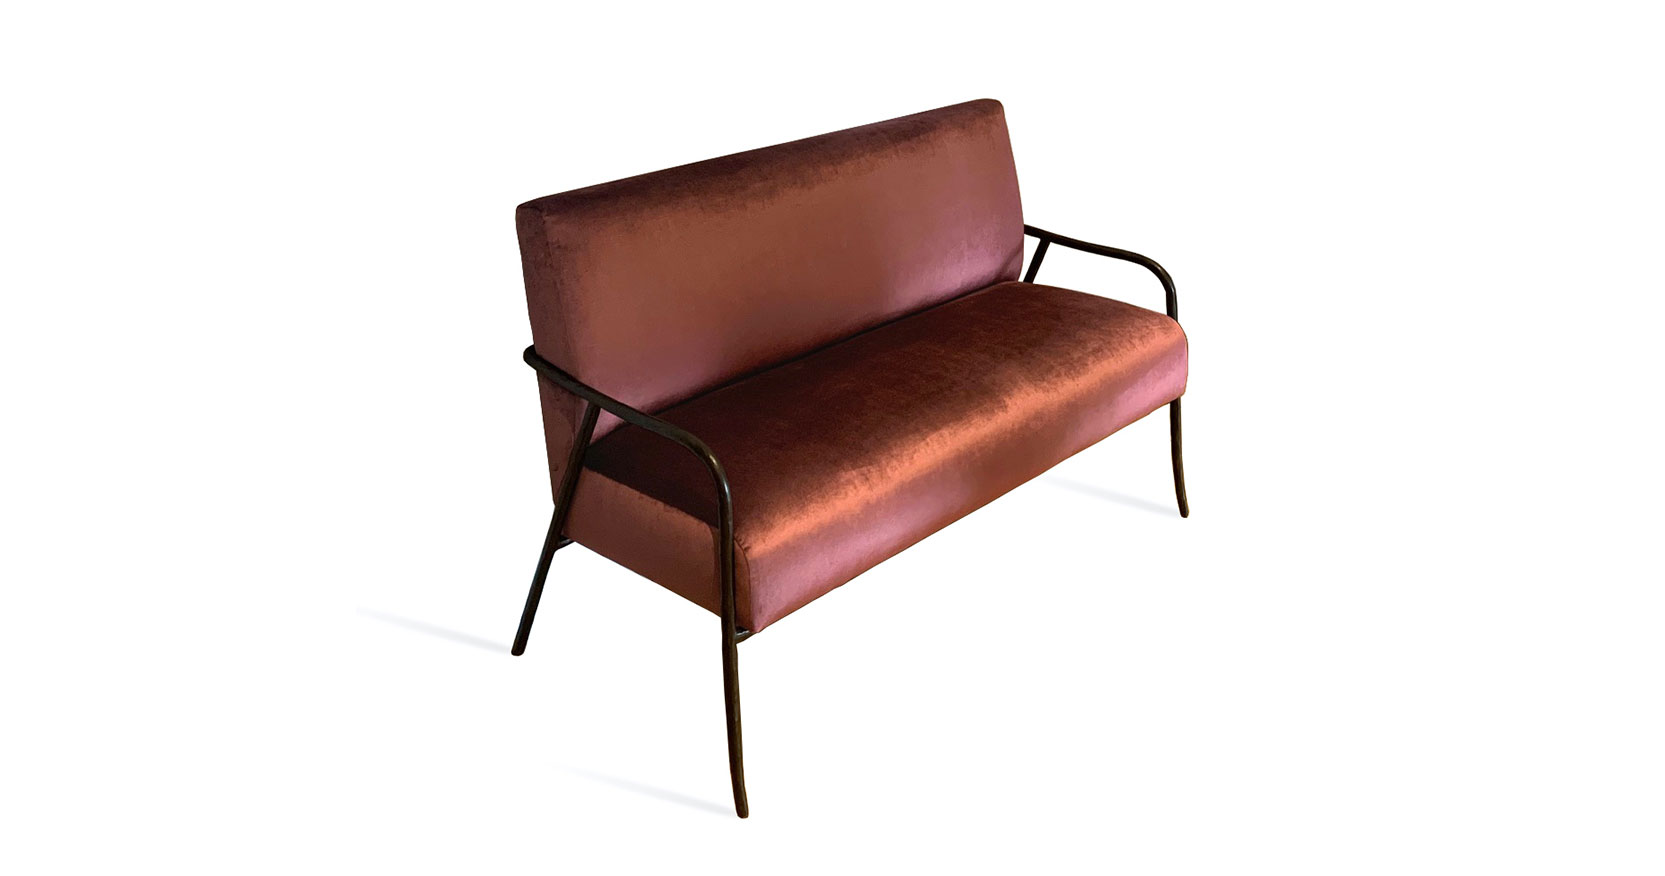 Eric Jourdan, minimalist bench with a back, done in a black rounded wrought iron frame, red velvet backrest and seat